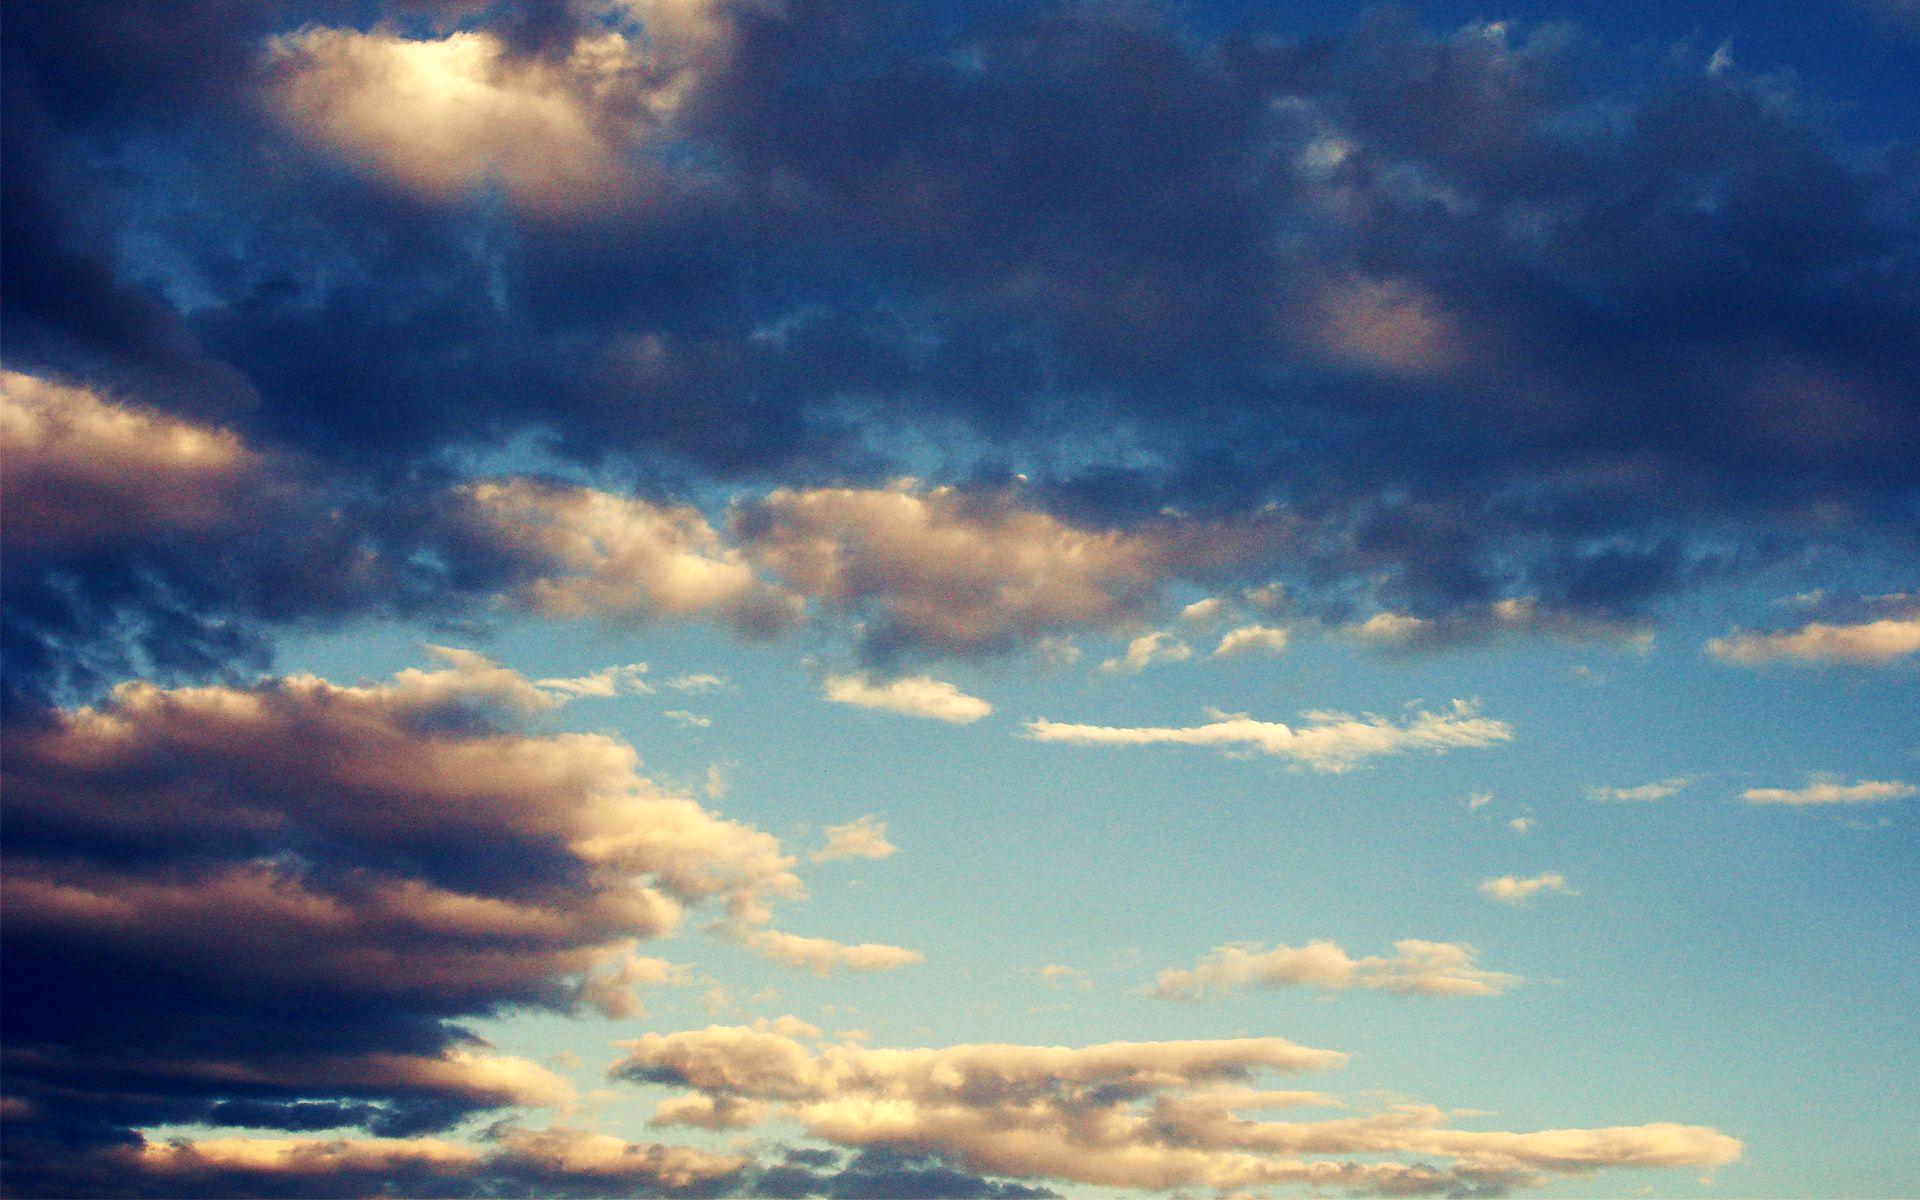  Aesthetic  Sky  Computer  Wallpapers  Top Free Aesthetic  Sky  